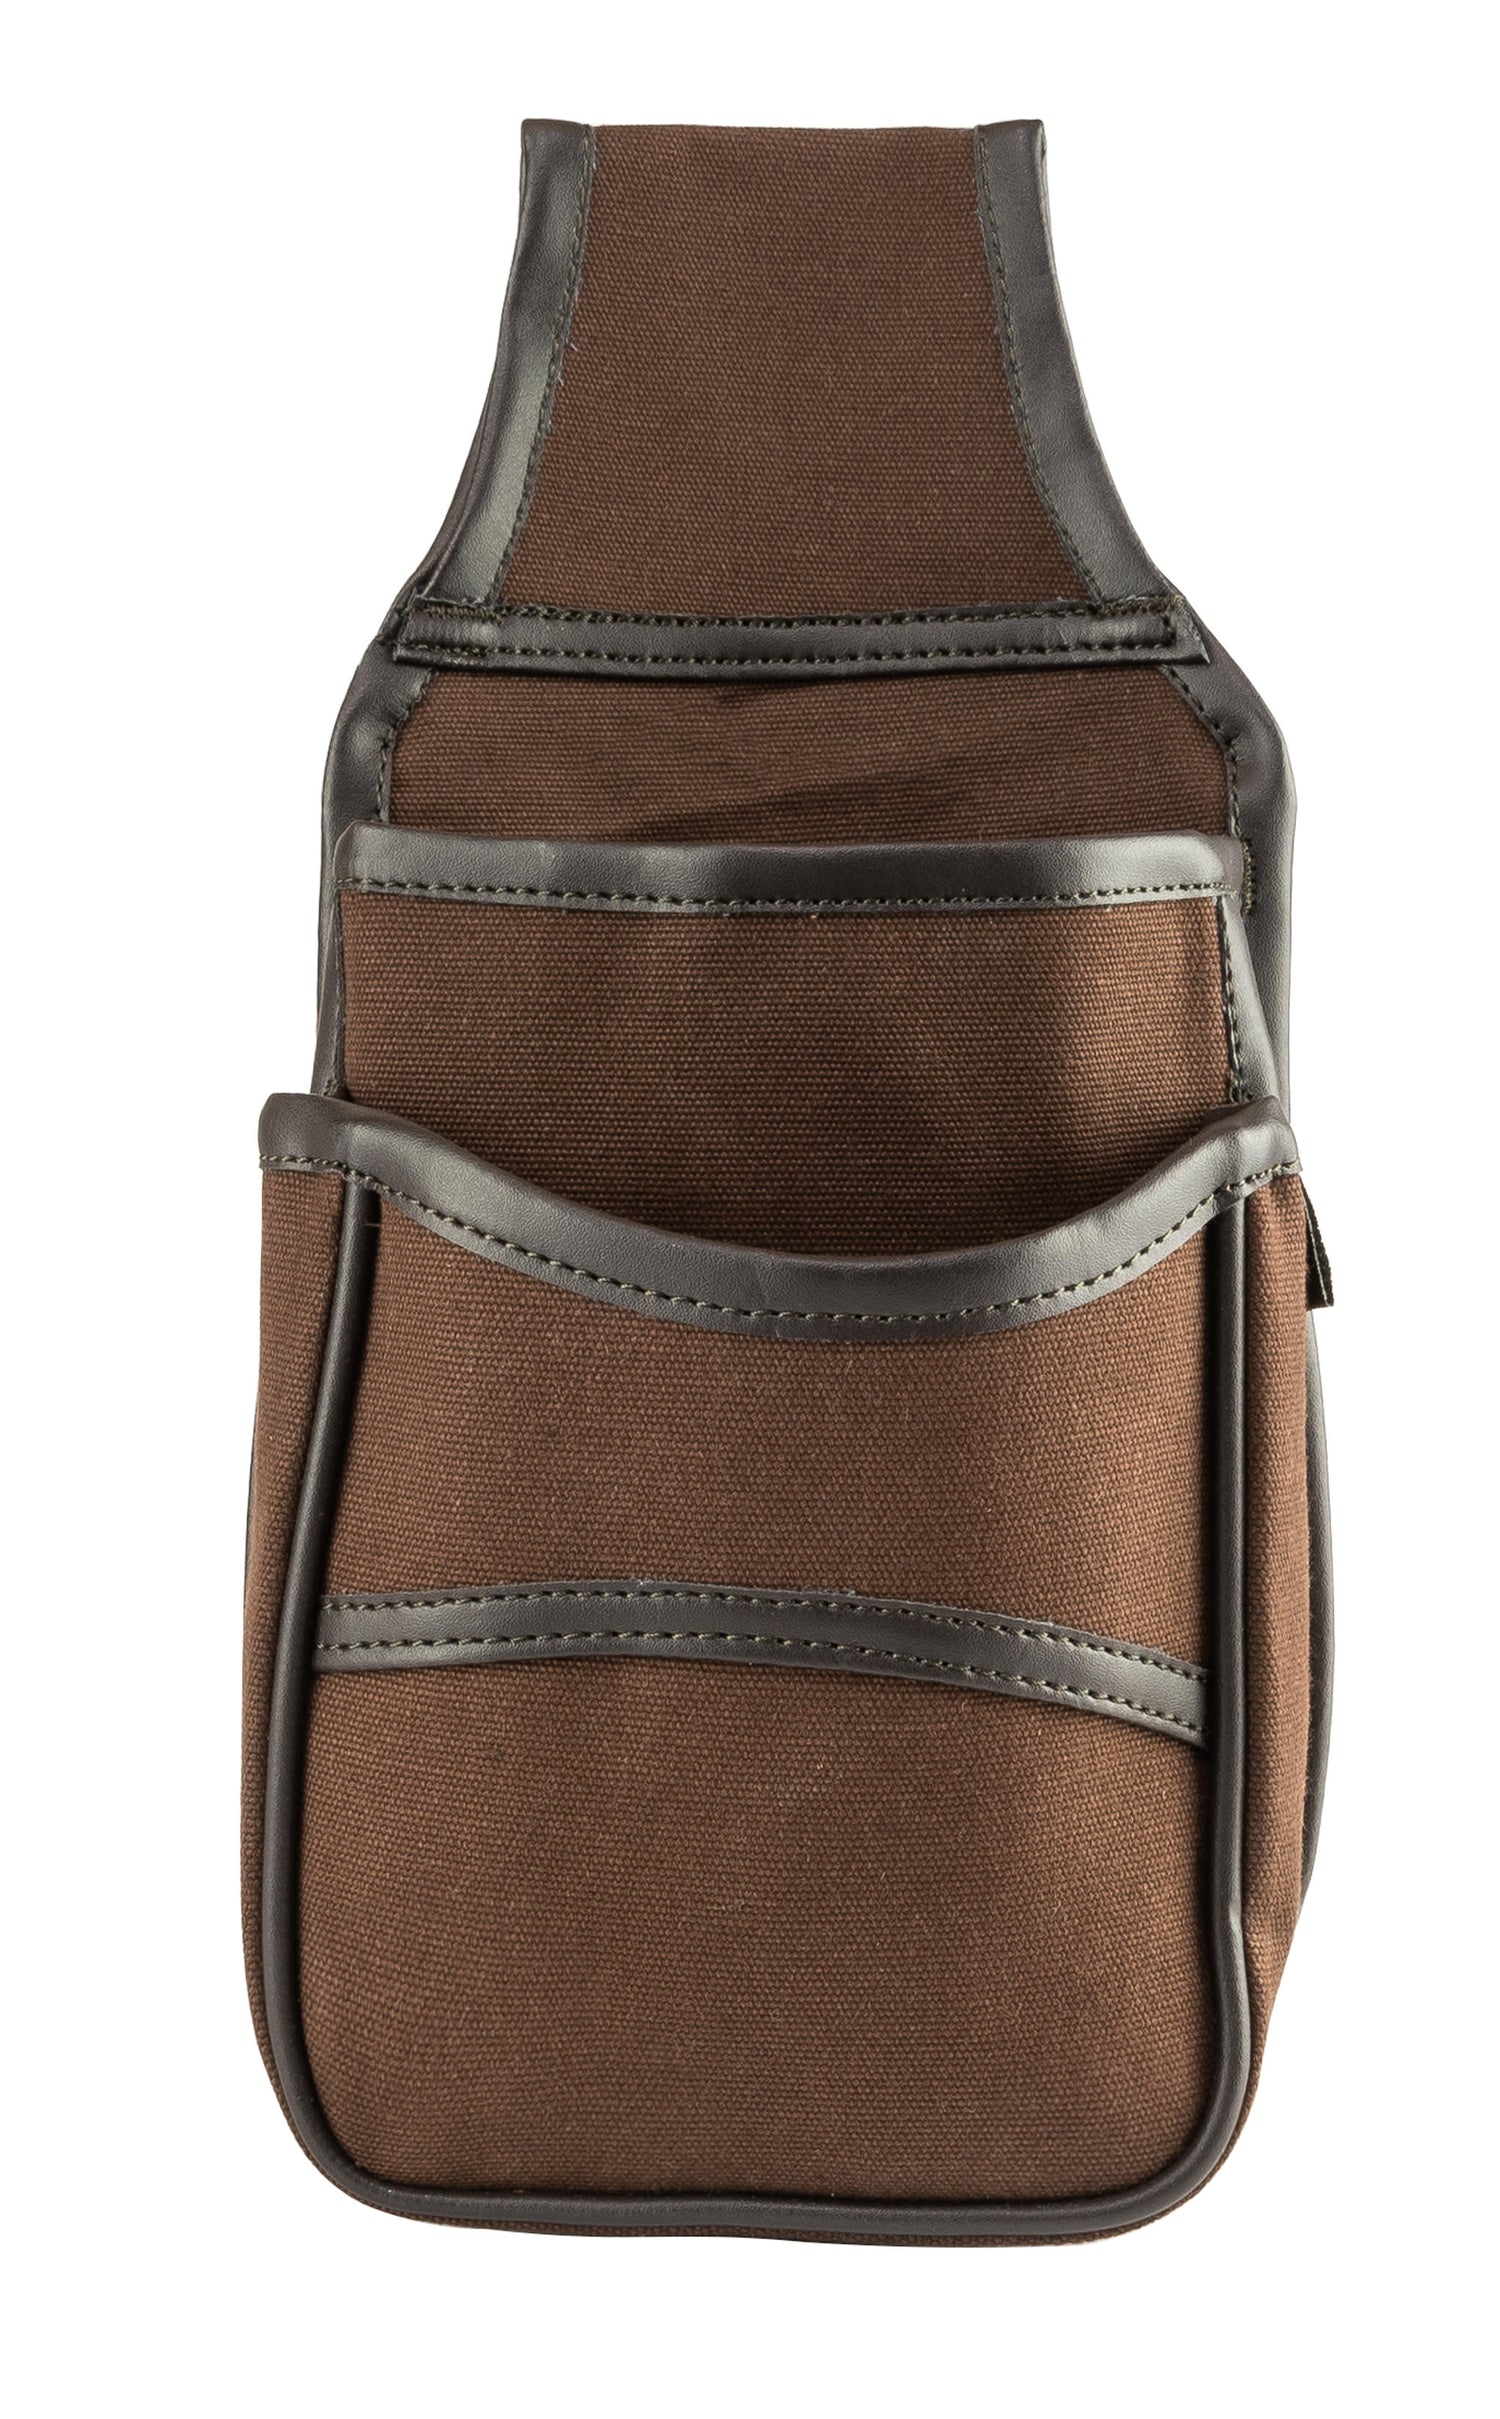 Jack Pyke Canvas Cartridge Pouch in Brown 